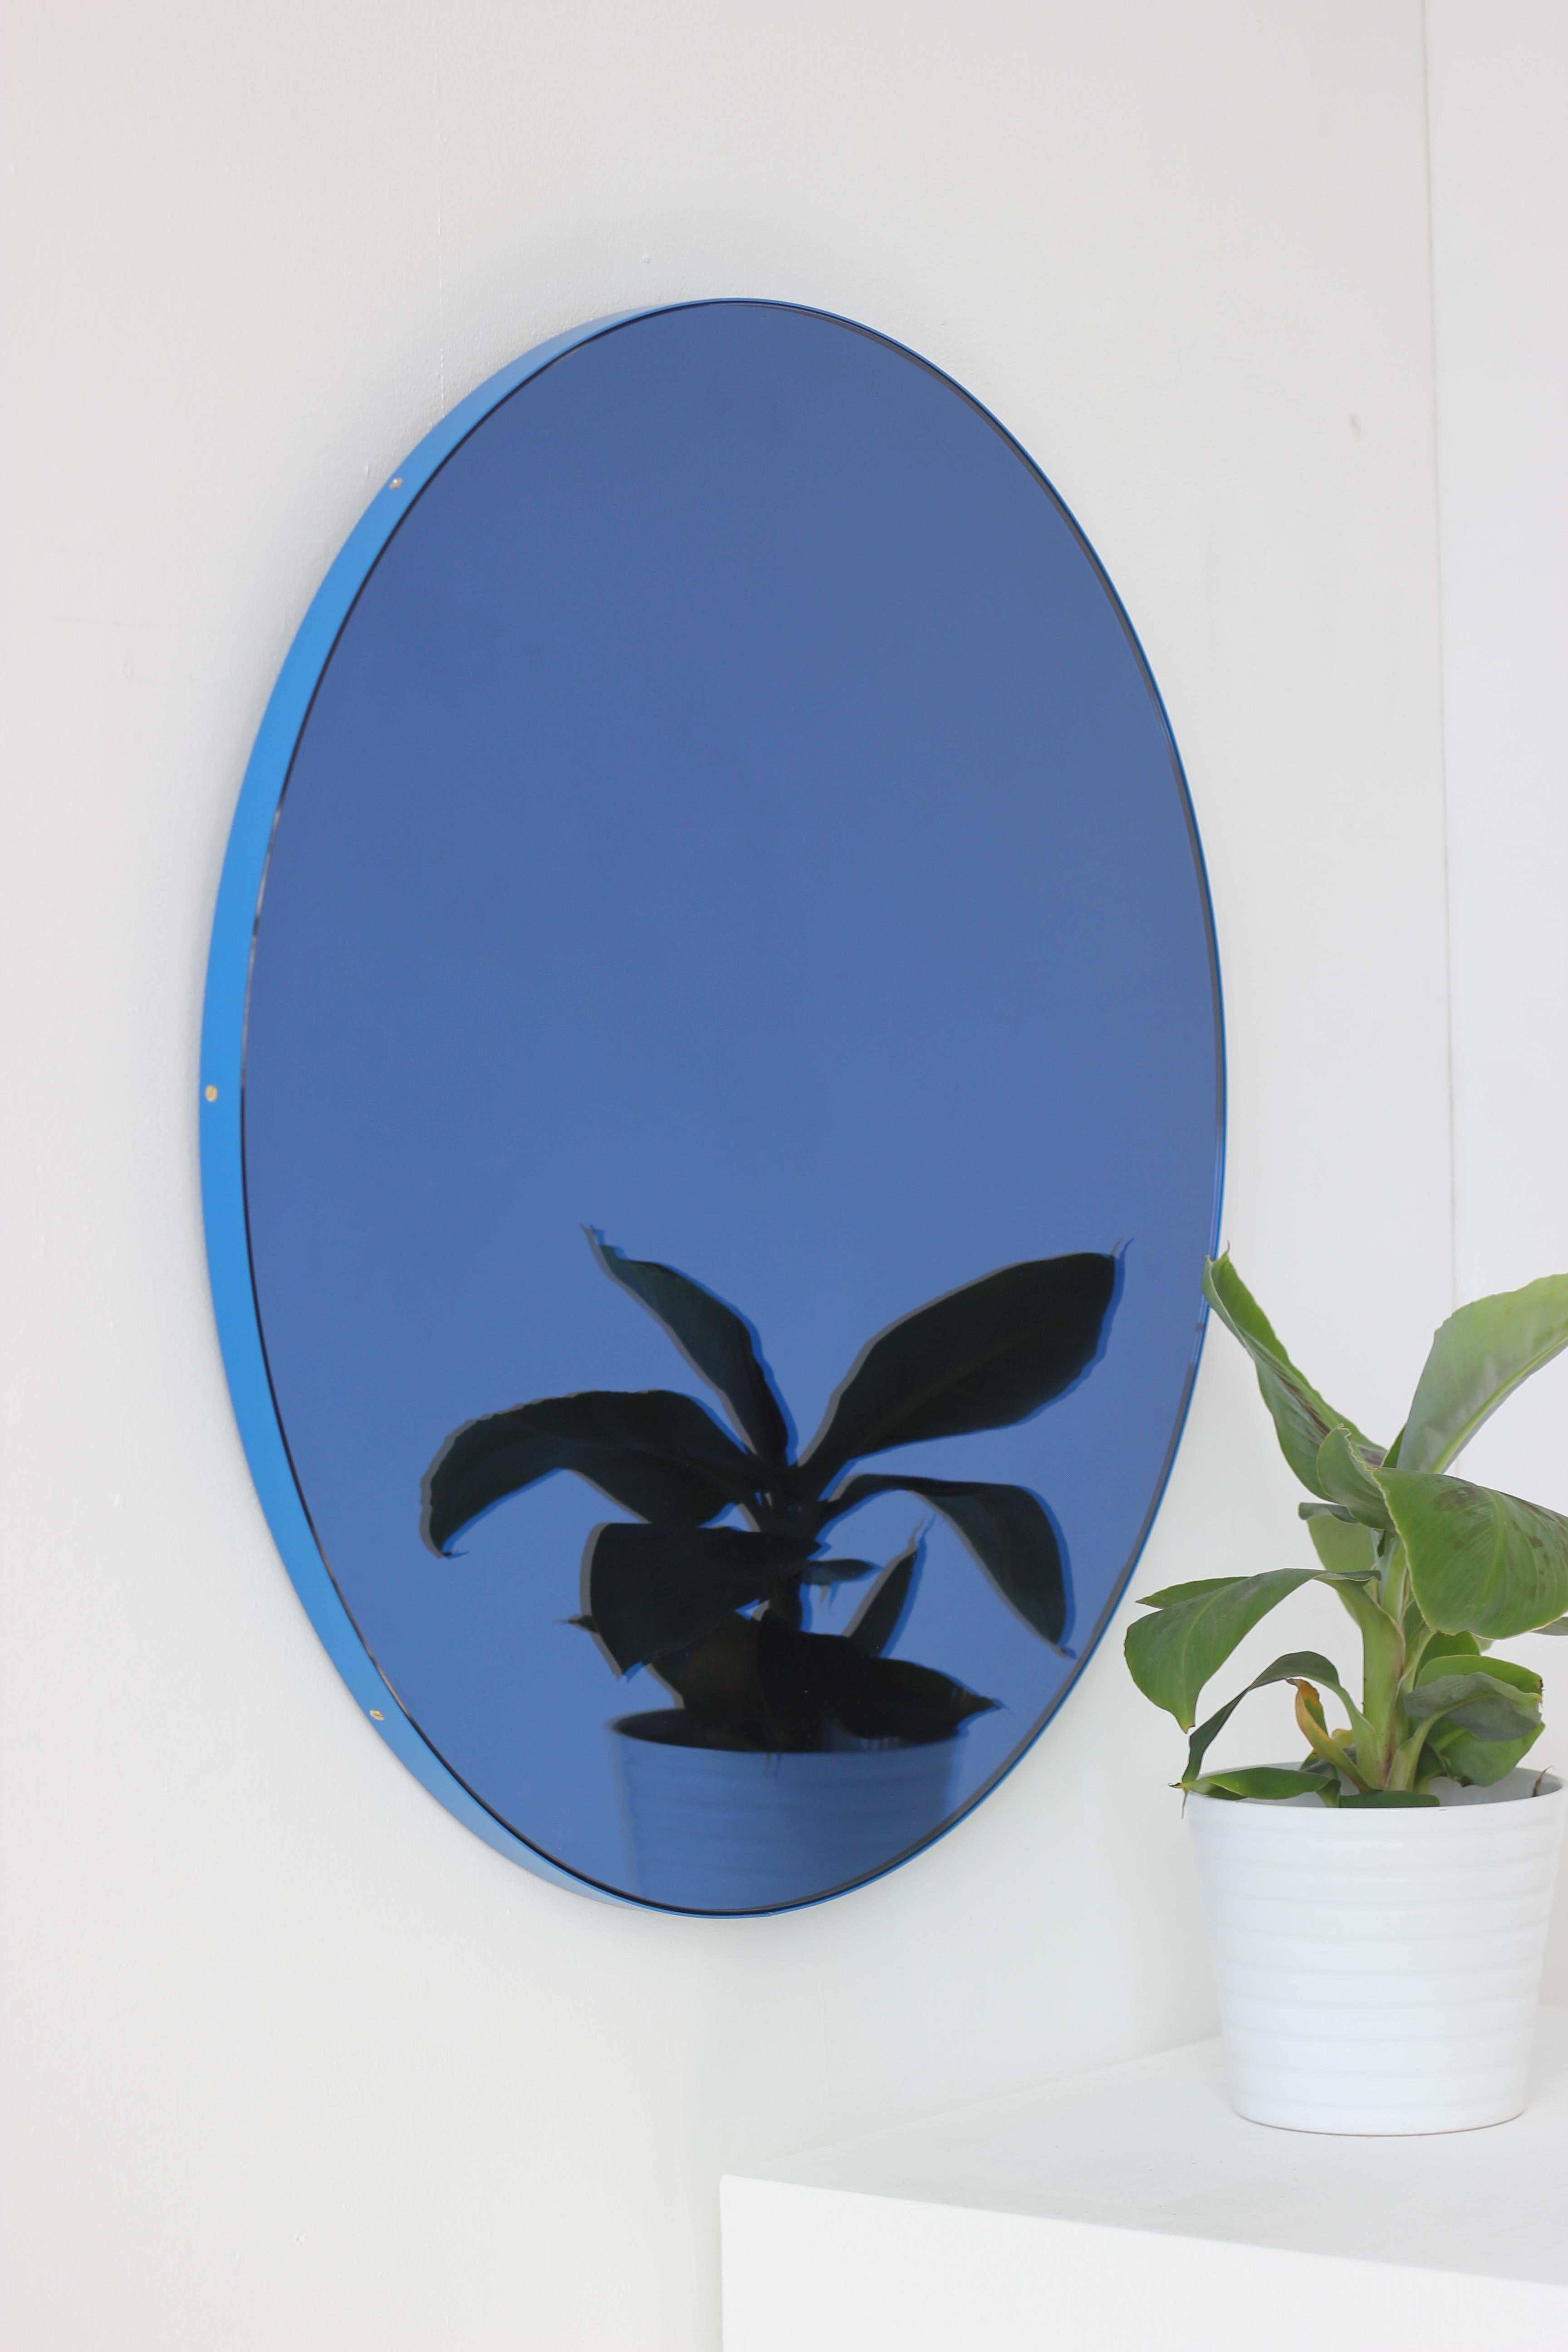 Organic Modern Orbis Blue Tinted Decorative Round Mirror with a Blue Frame, Large For Sale